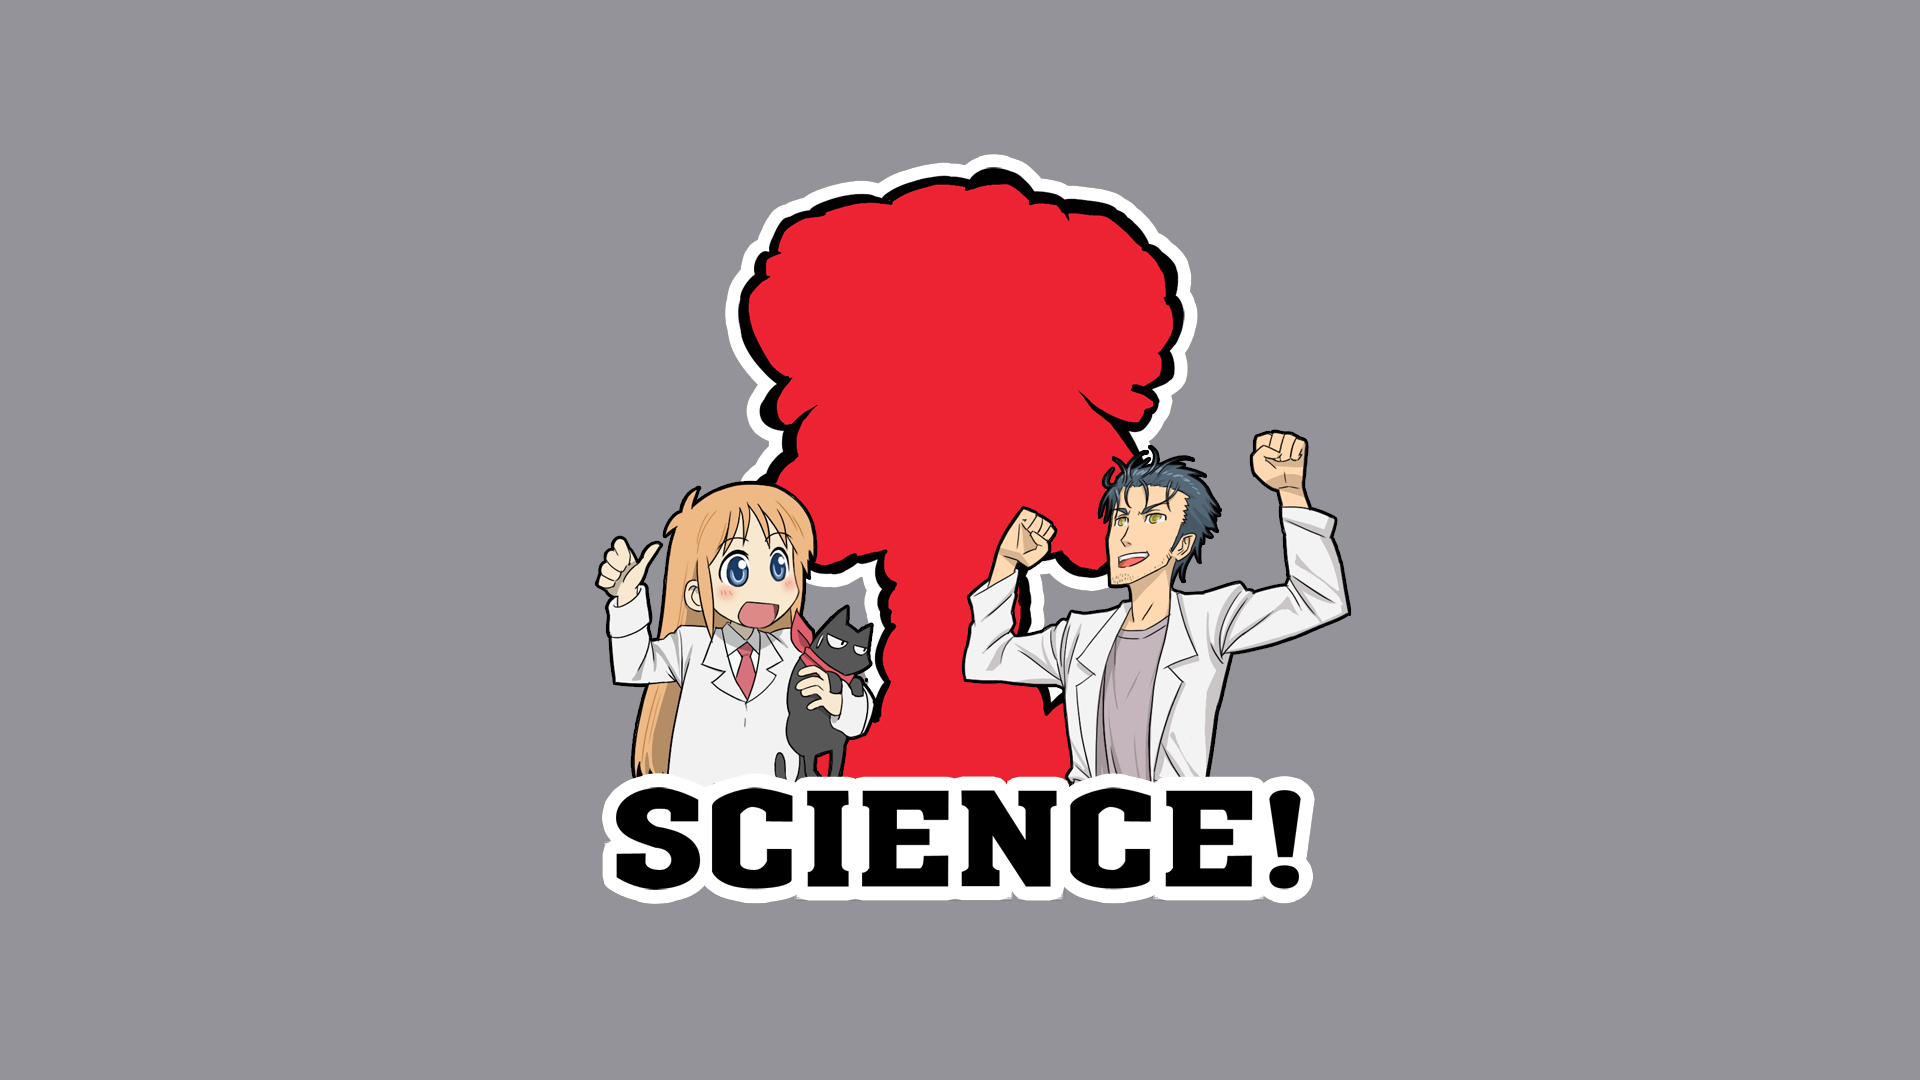 All in the name of SCIENCE!